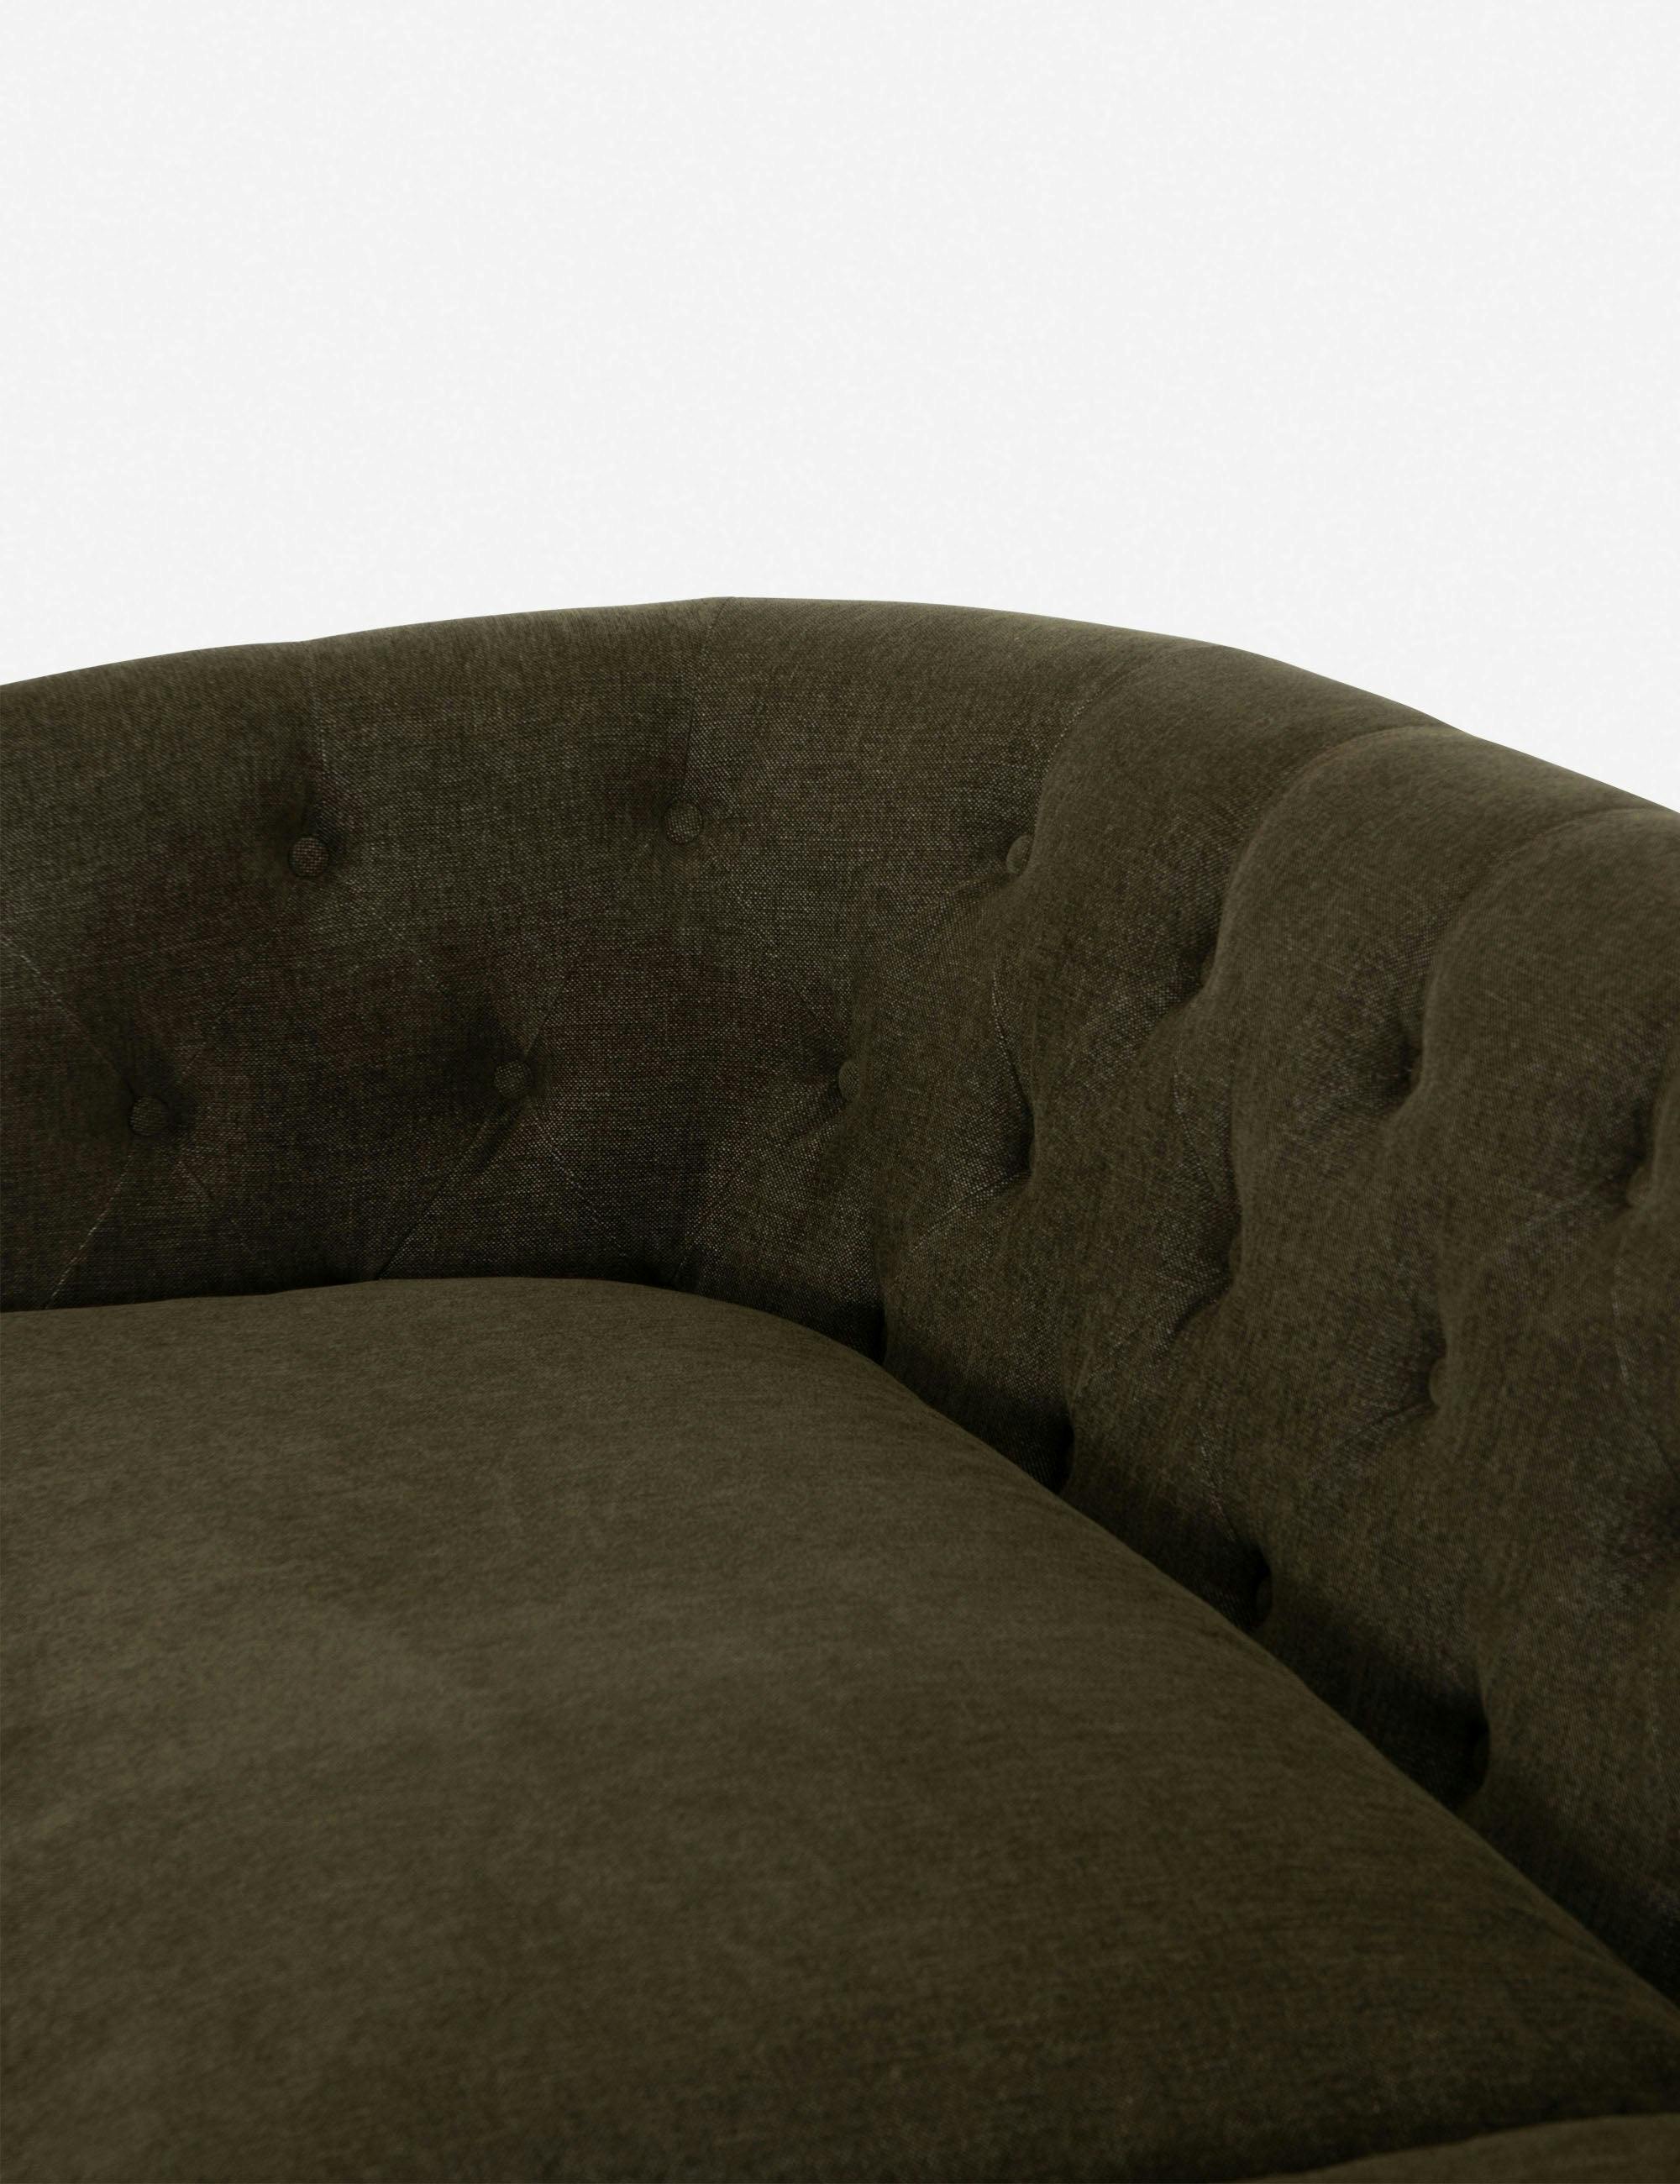 Parisian Charm Sutton Olive Tufted Sofa with Rolled Arms